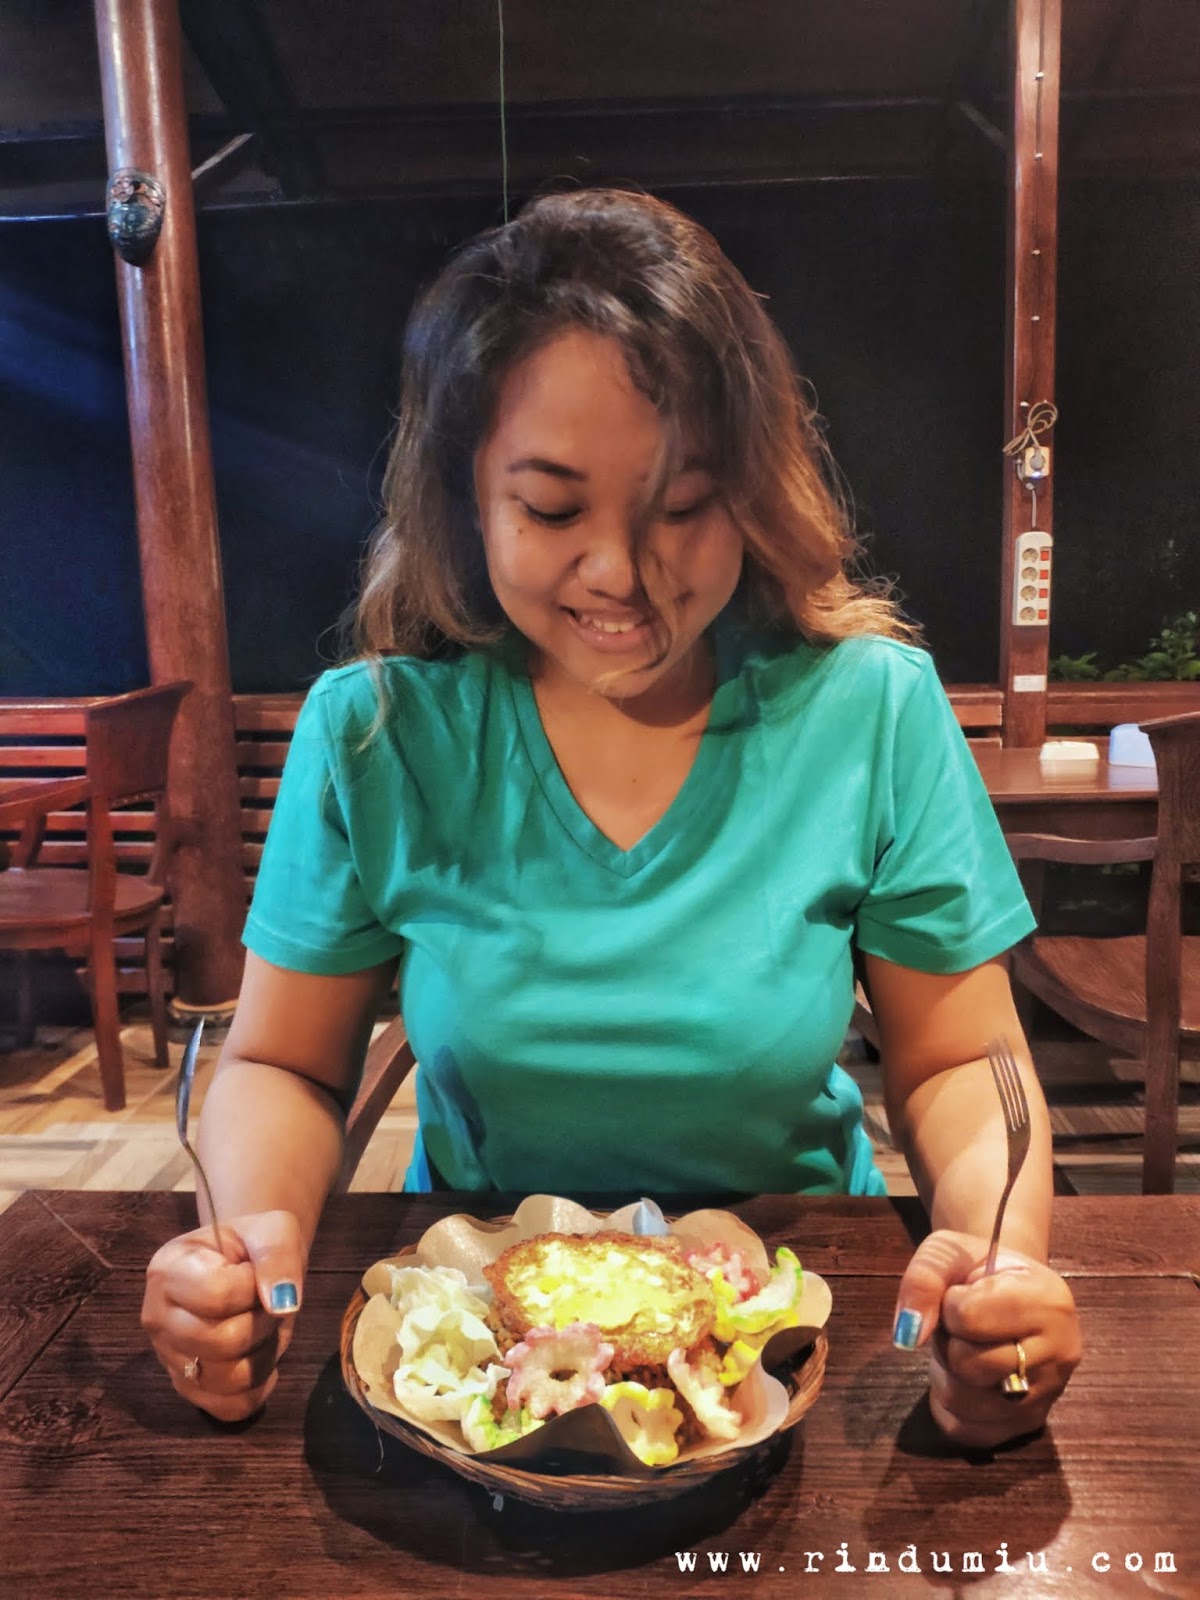 A woman is ready to eat Sego Thiwul Goreng served with a bull's eye egg, some colorful kerupuk, and slices of cabbage at Kopi Plosok cafe in Sleman Jogja